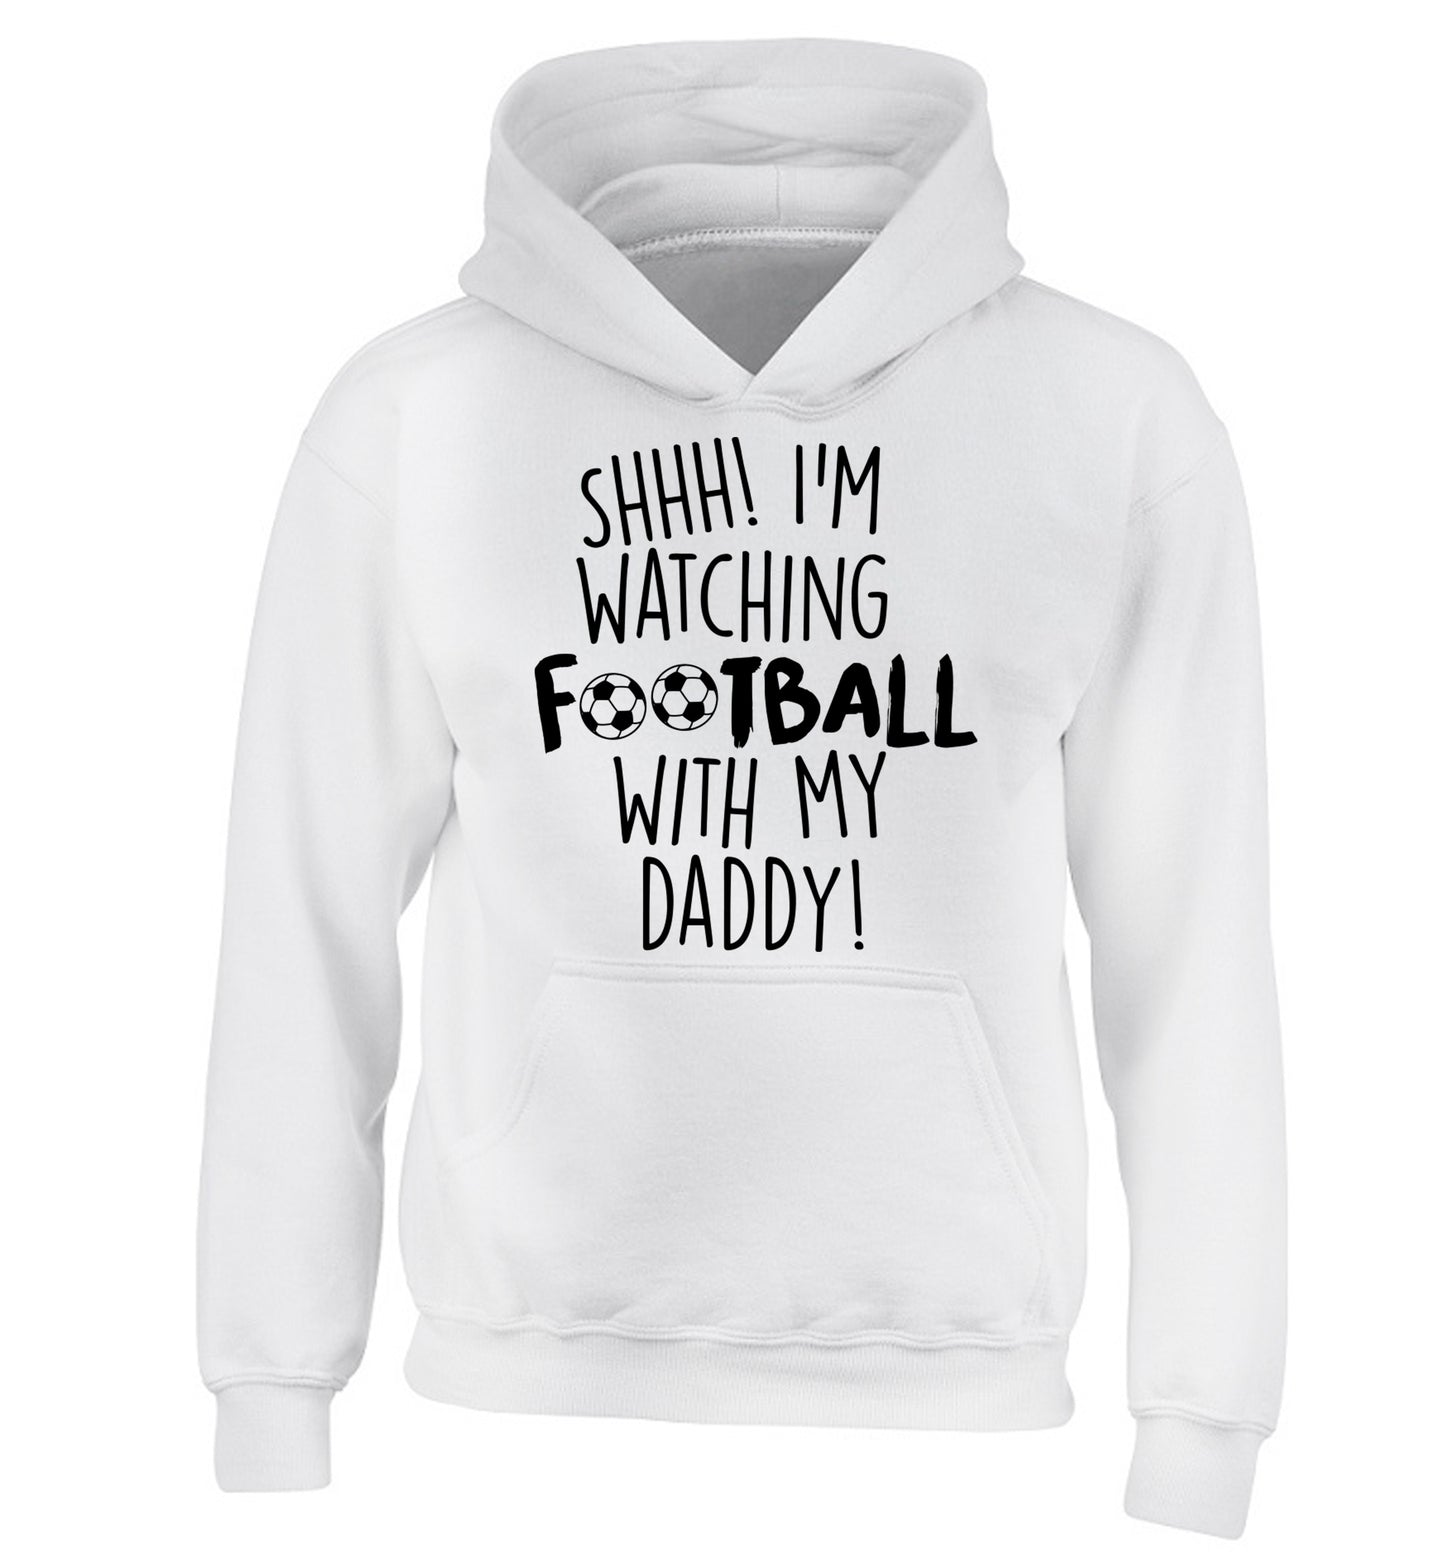 Shhh I'm watching football with my daddy children's white hoodie 12-14 Years